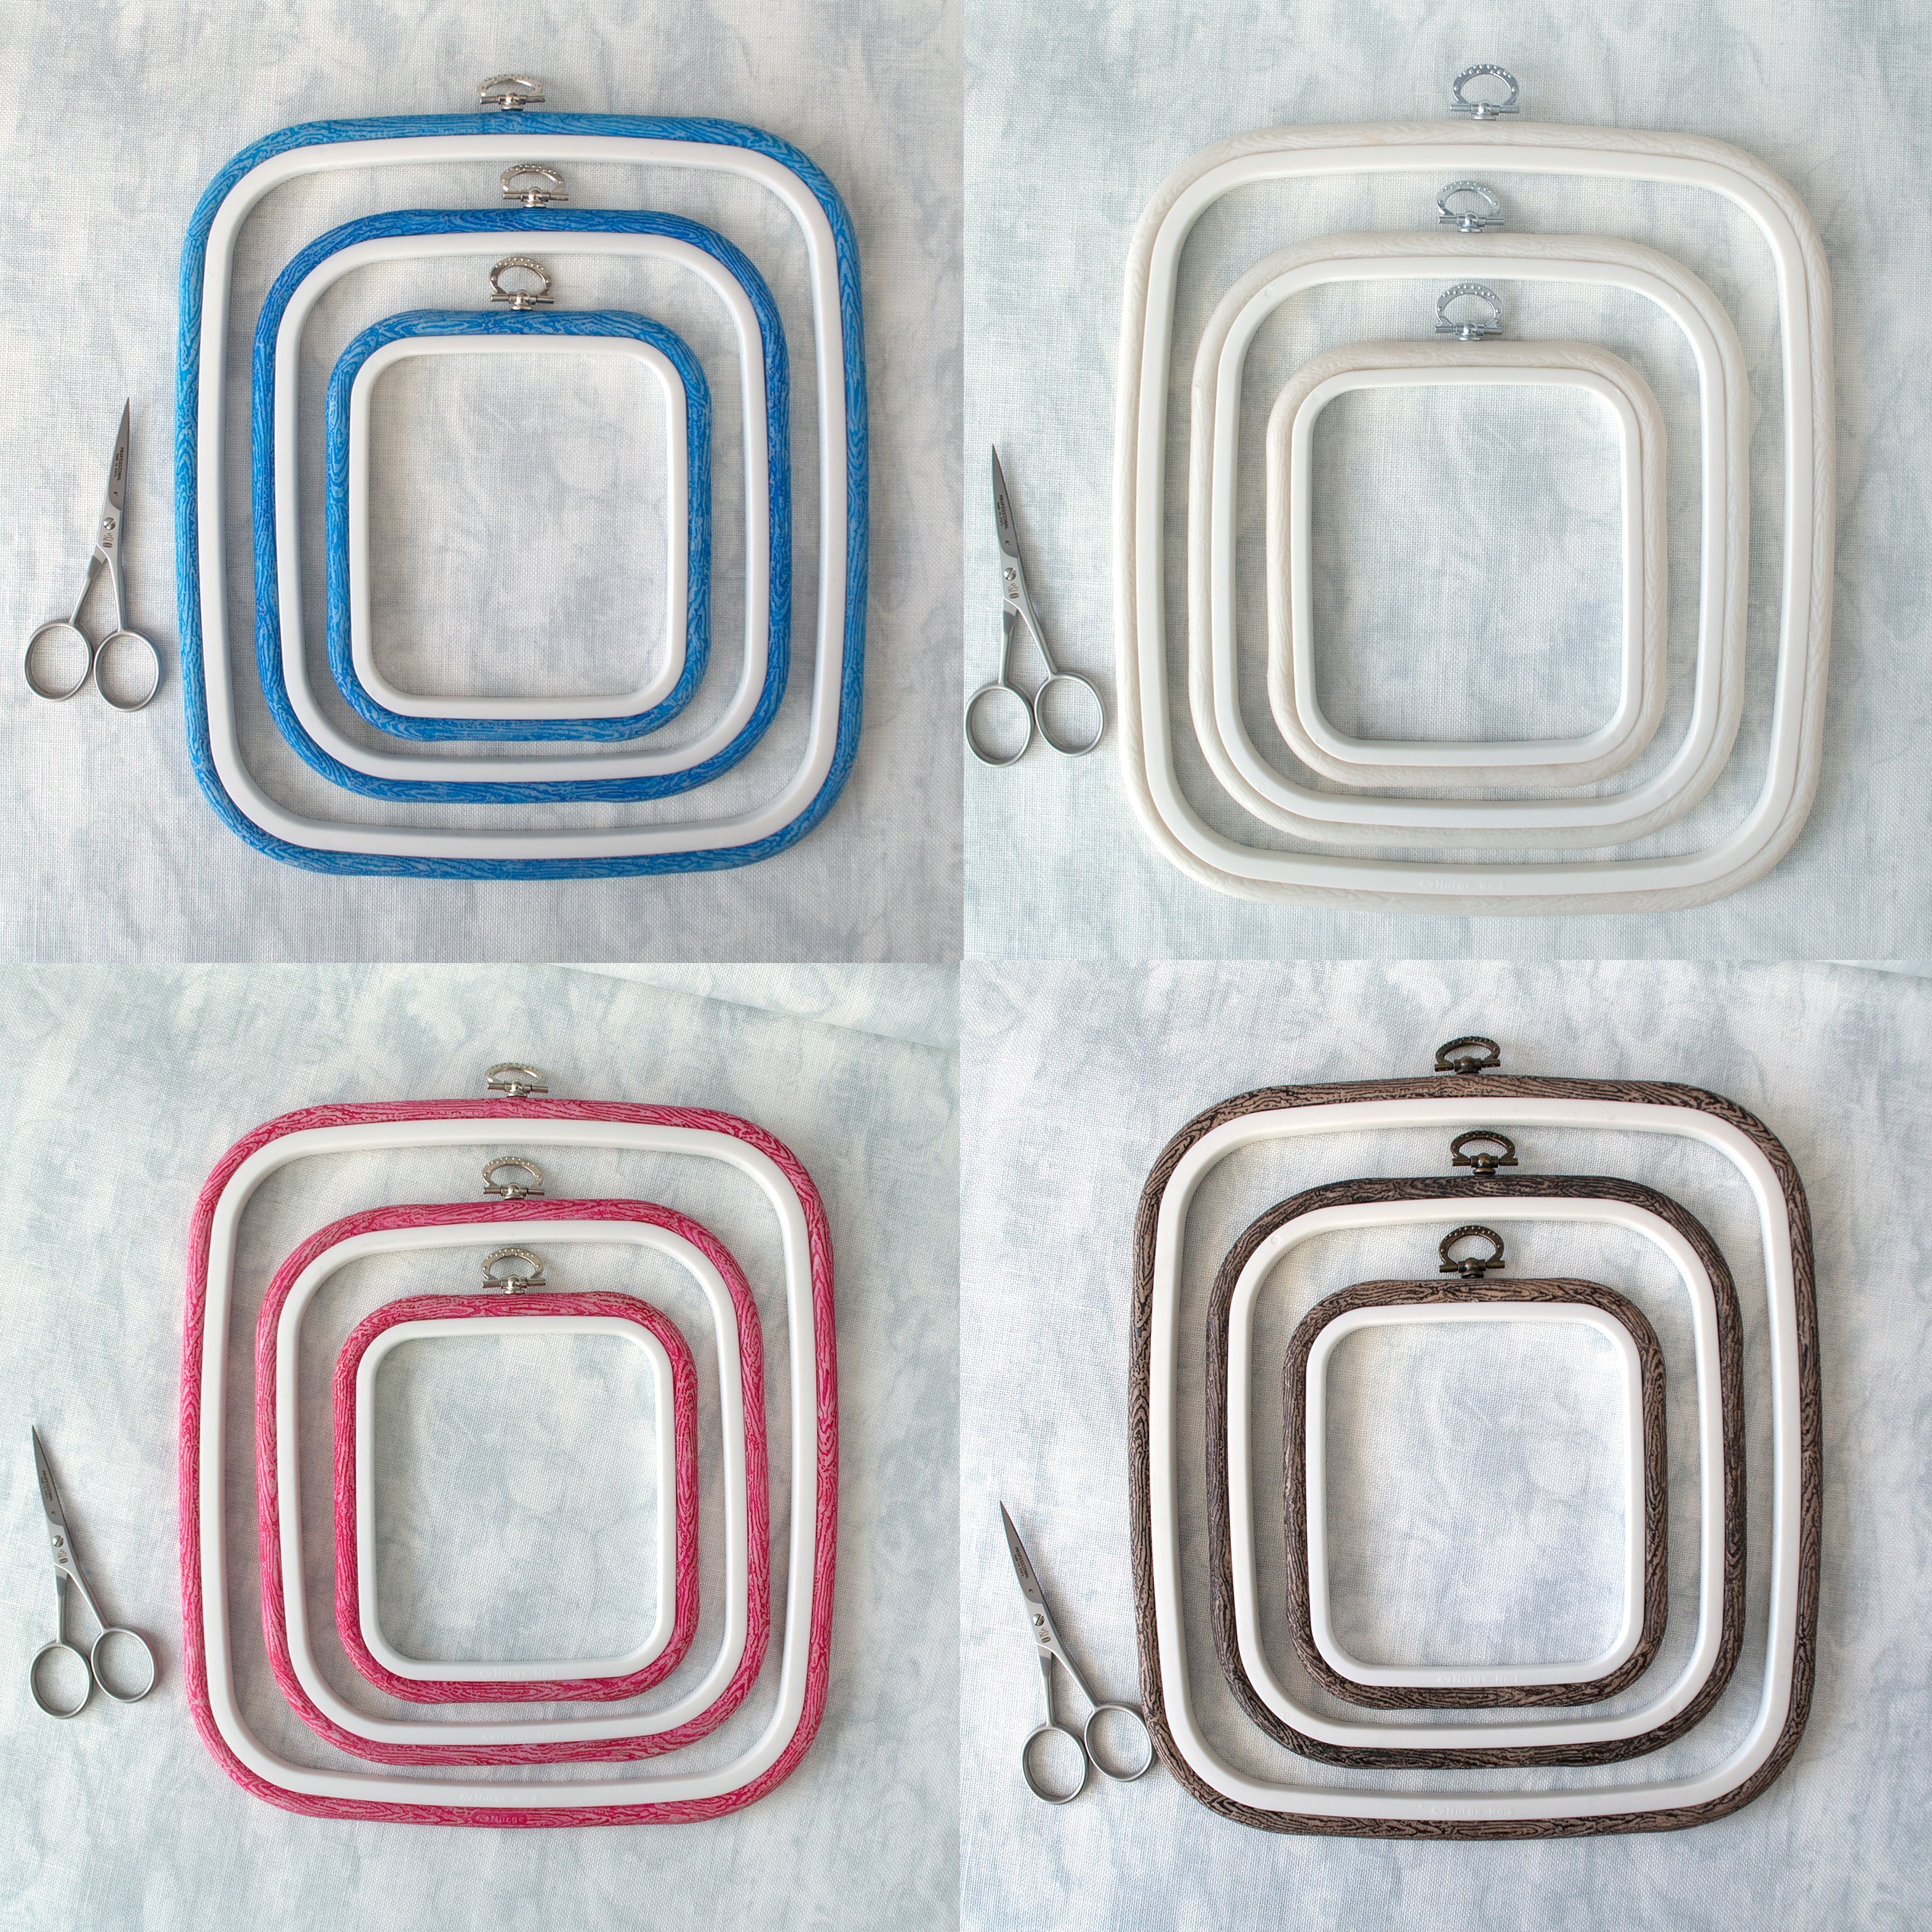 Nurge Flexi Hoop Square Frame-Frame Available in 4 Colors and 3 Sizes